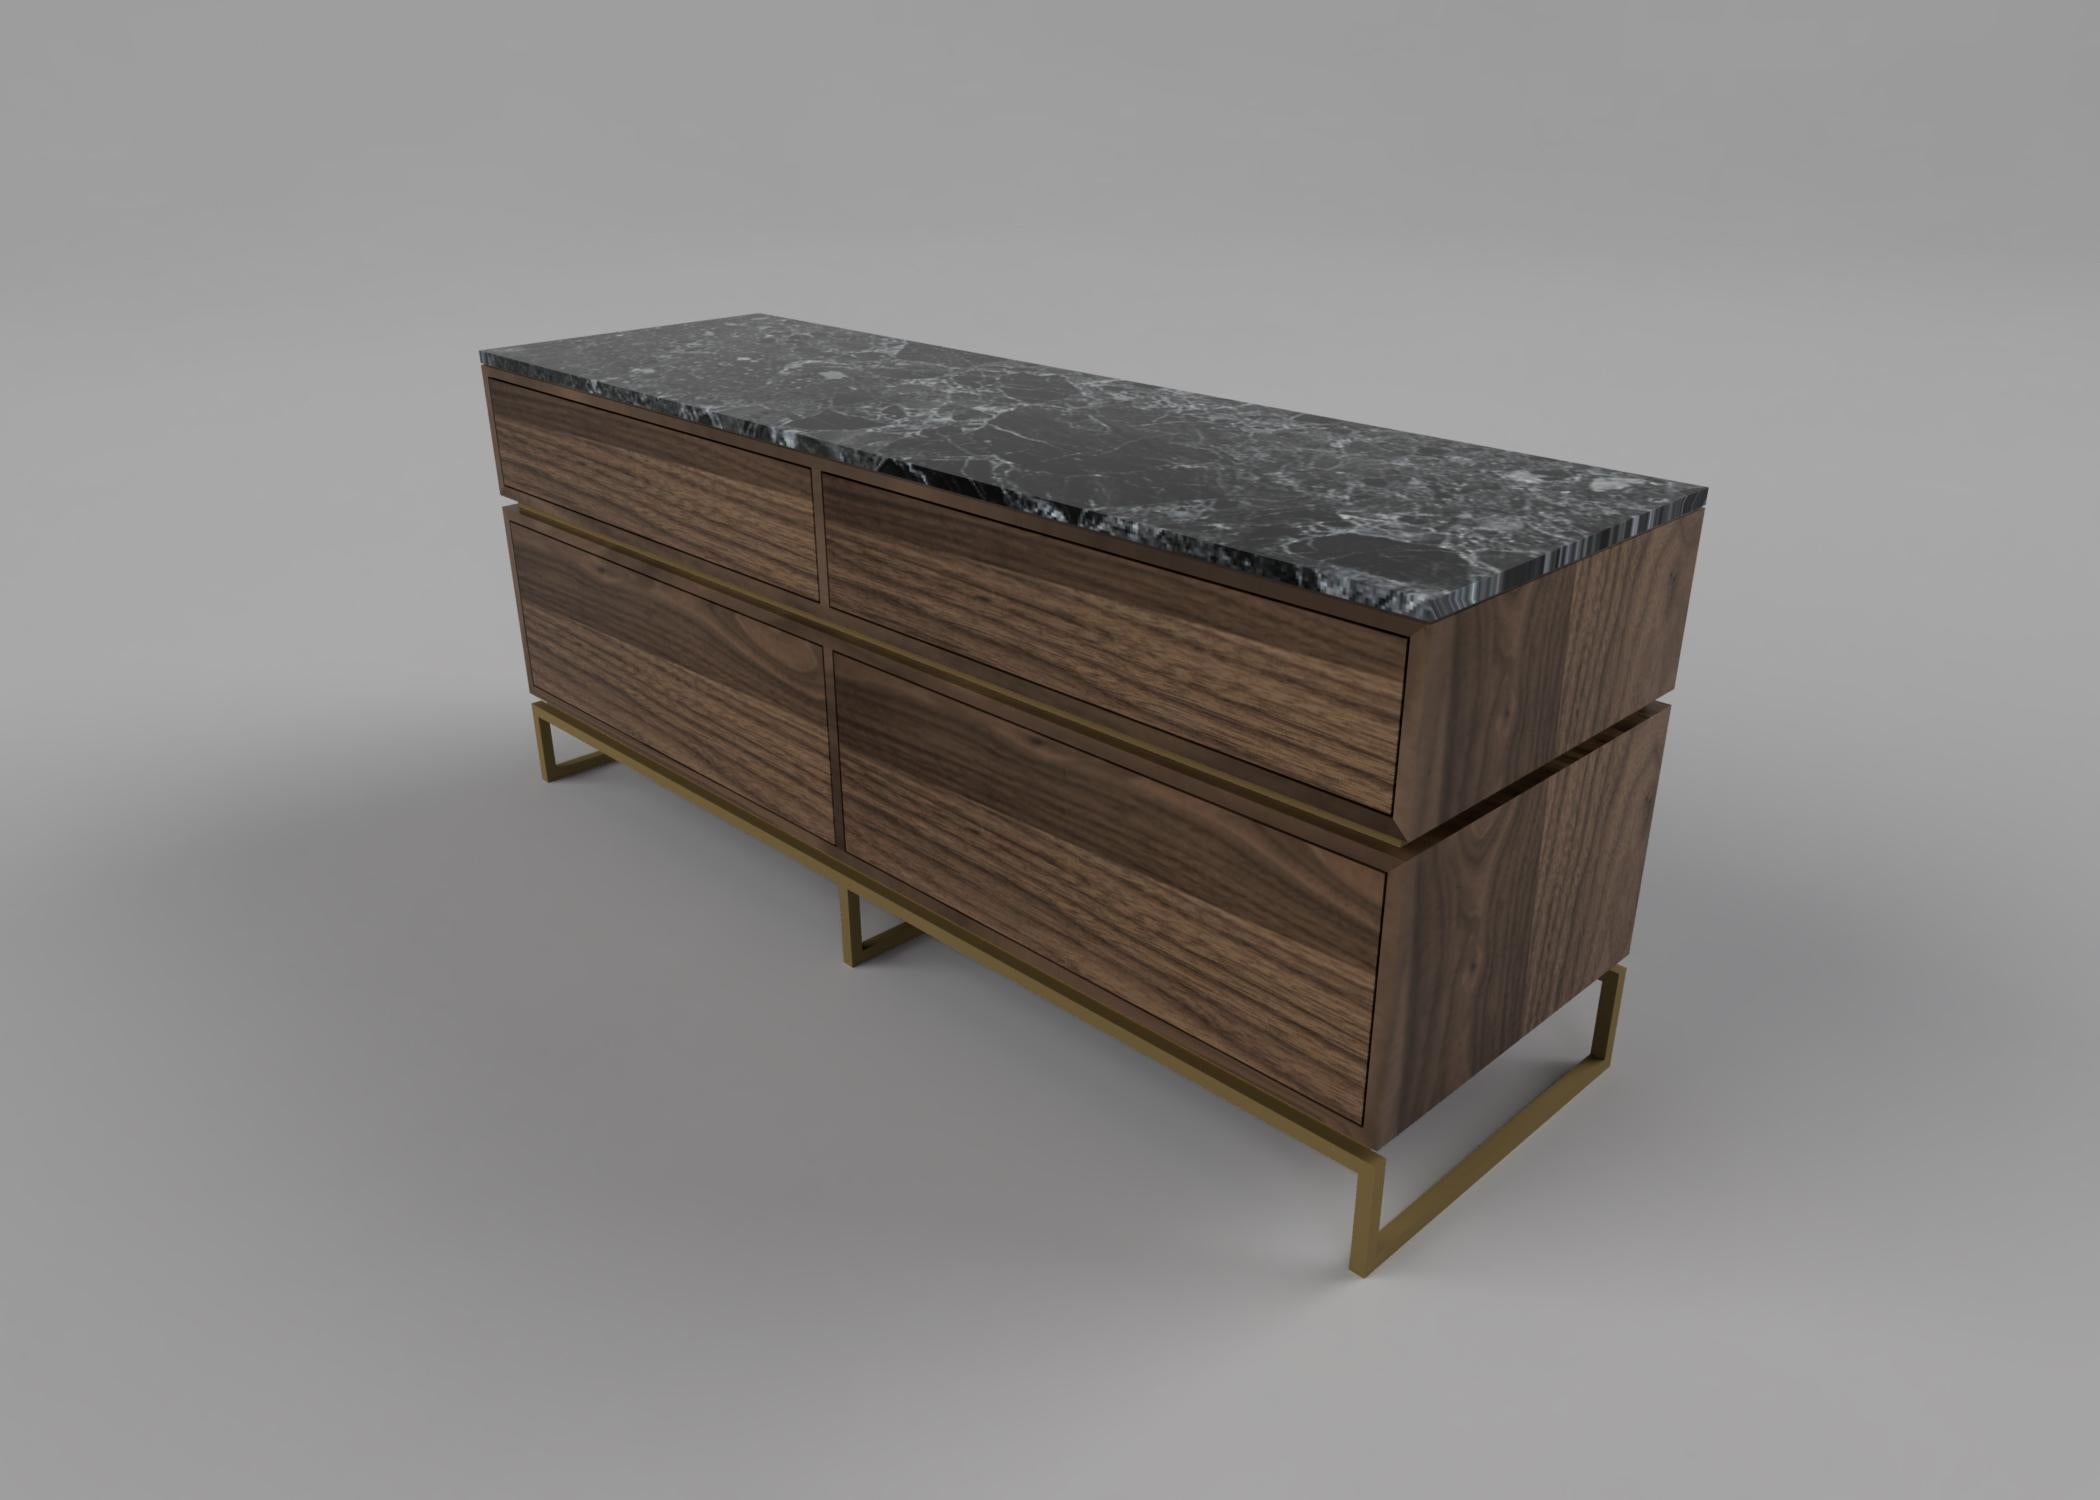 Pelios chest of drawers
A perfect pair to the Pelios bedside table, the pelios chest of drawer exudes the same seductive, glamorous aesthetic. Designed with sleekly-architectural lines, brass trimming detailing, luxe surfaces and multiple storage